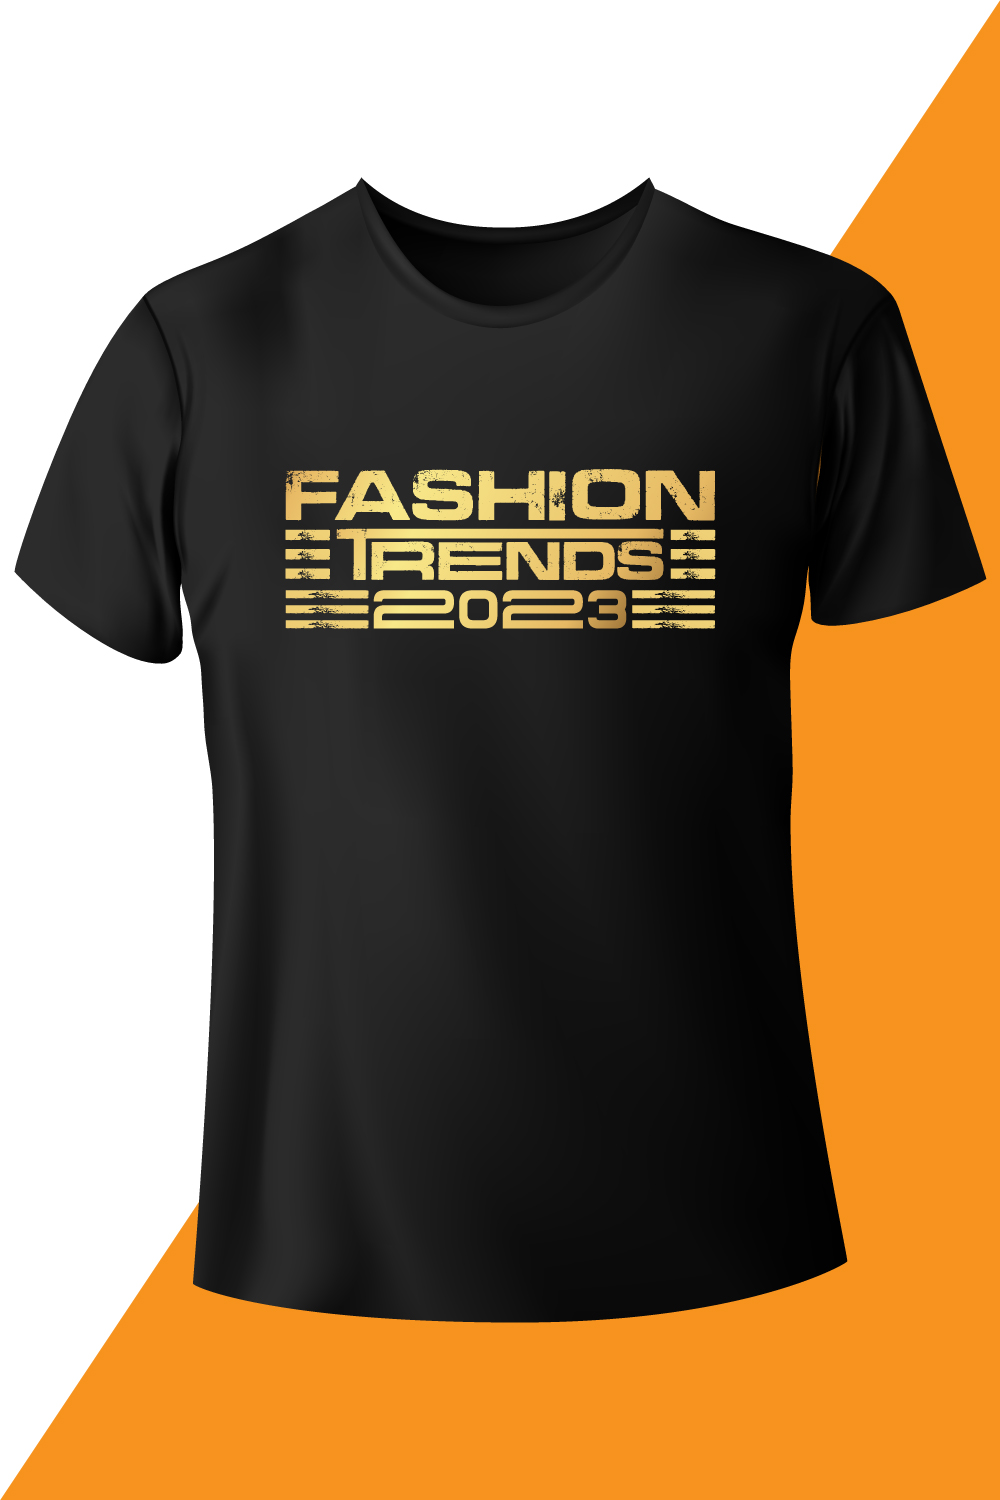 Image of a black t-shirt with a unique print Fashion Trends 2023.